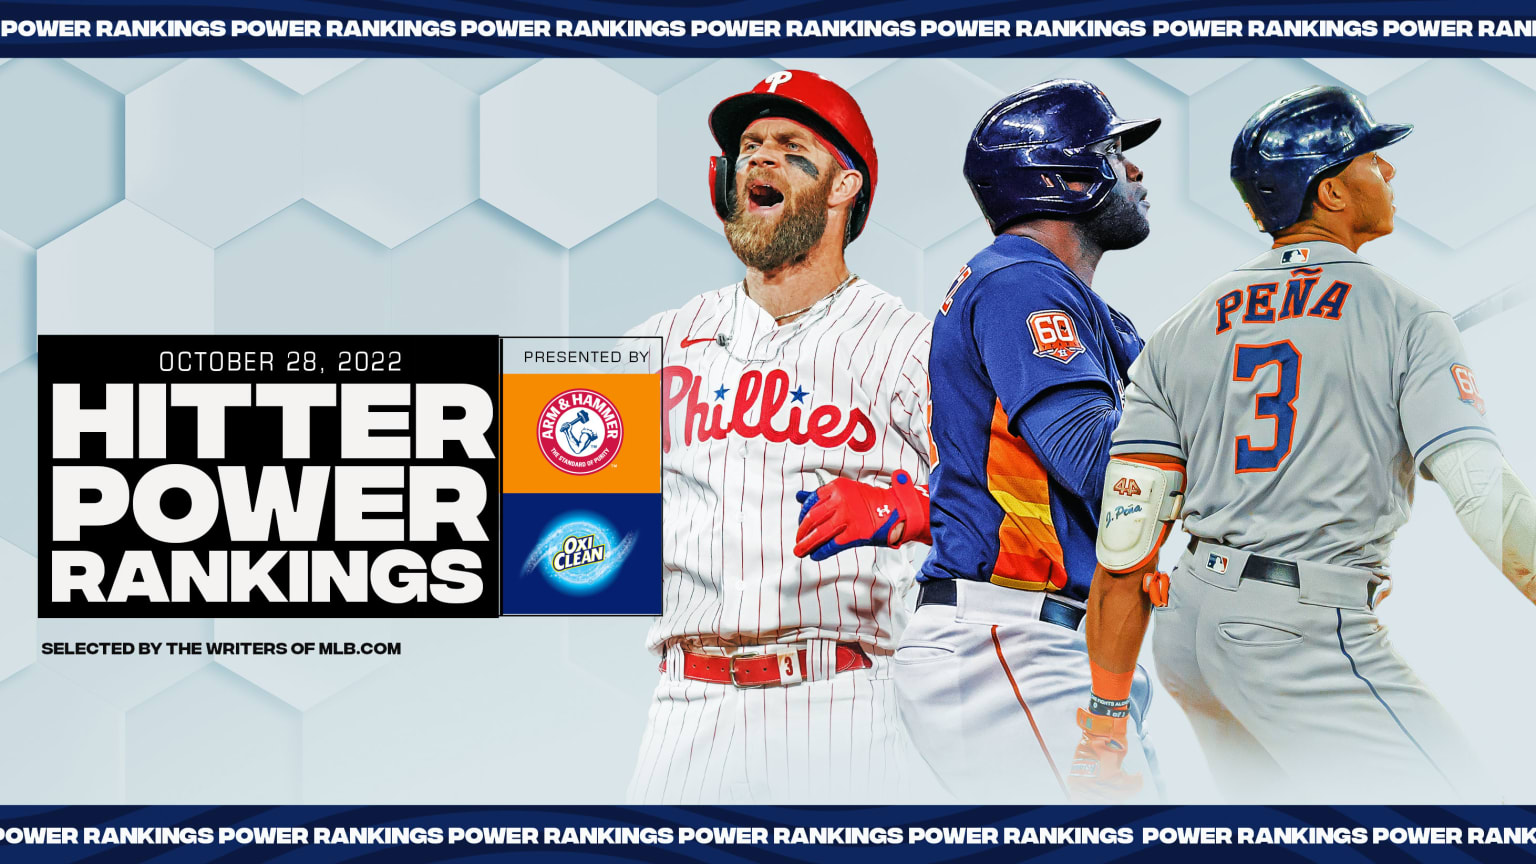 Bryce Harper, Yordan Alvarez and Jeremy Peña are pictured next to the Hitter Power Rankings logo